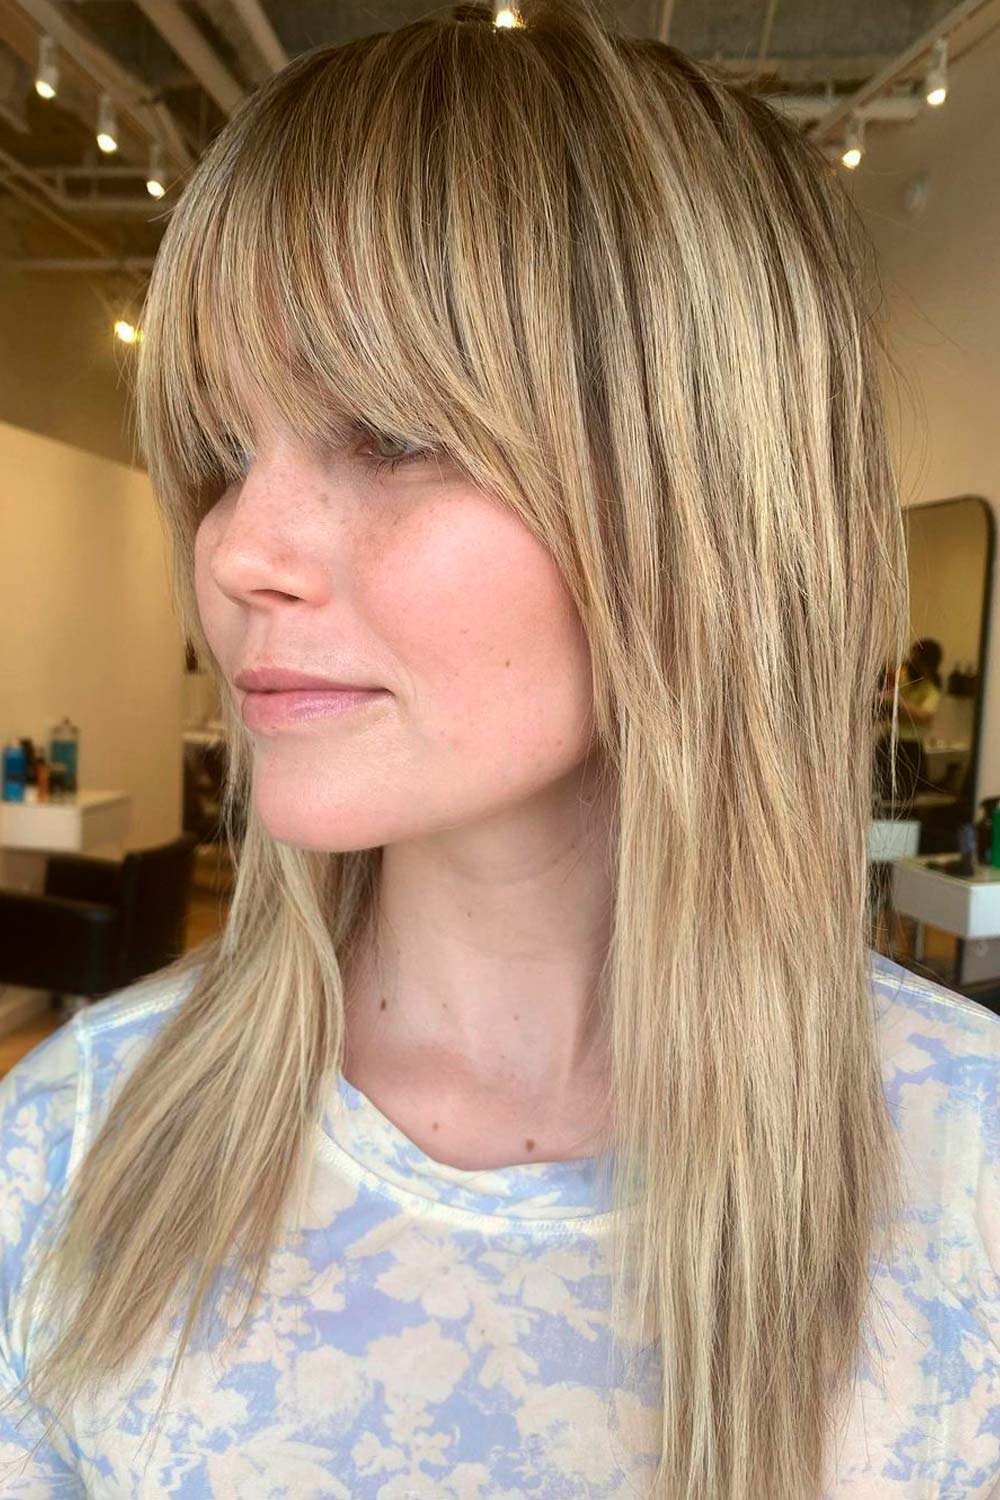 Things to Consider Before Getting French Bangs